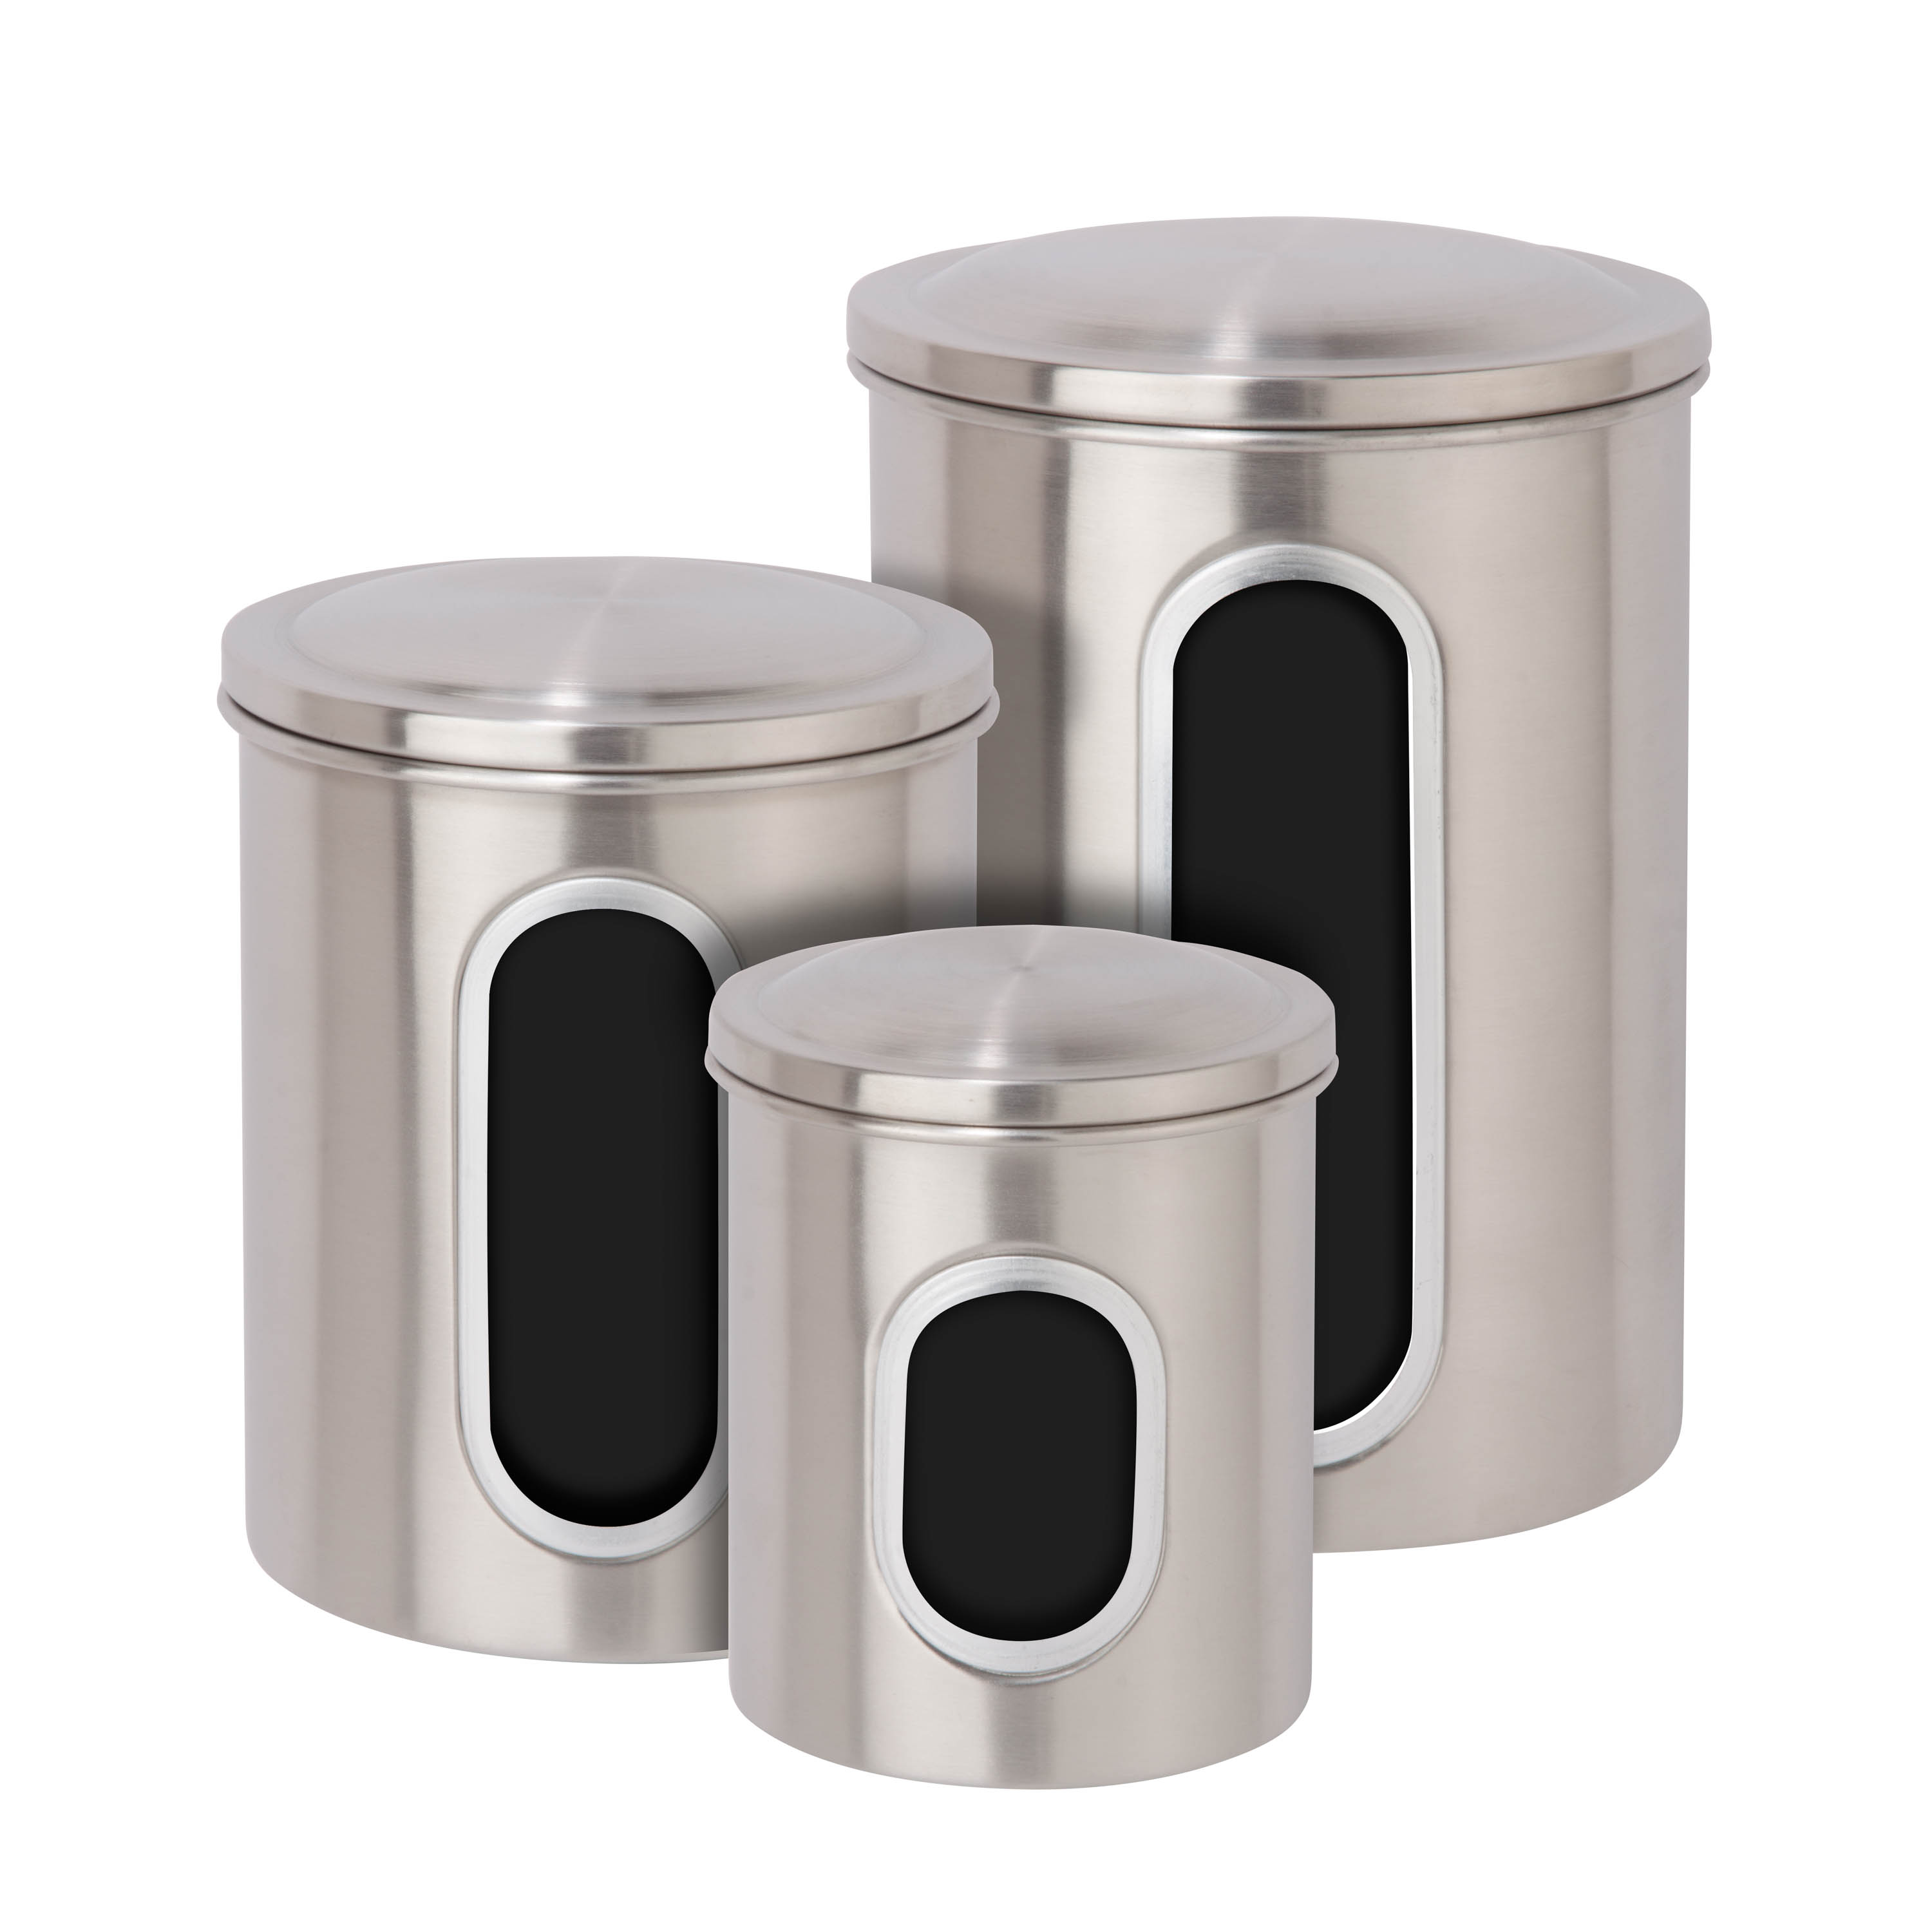 Honey-Can-Do Stainless Steel 3-Piece Nesting Kitchen Canister Set, Silver - image 1 of 5